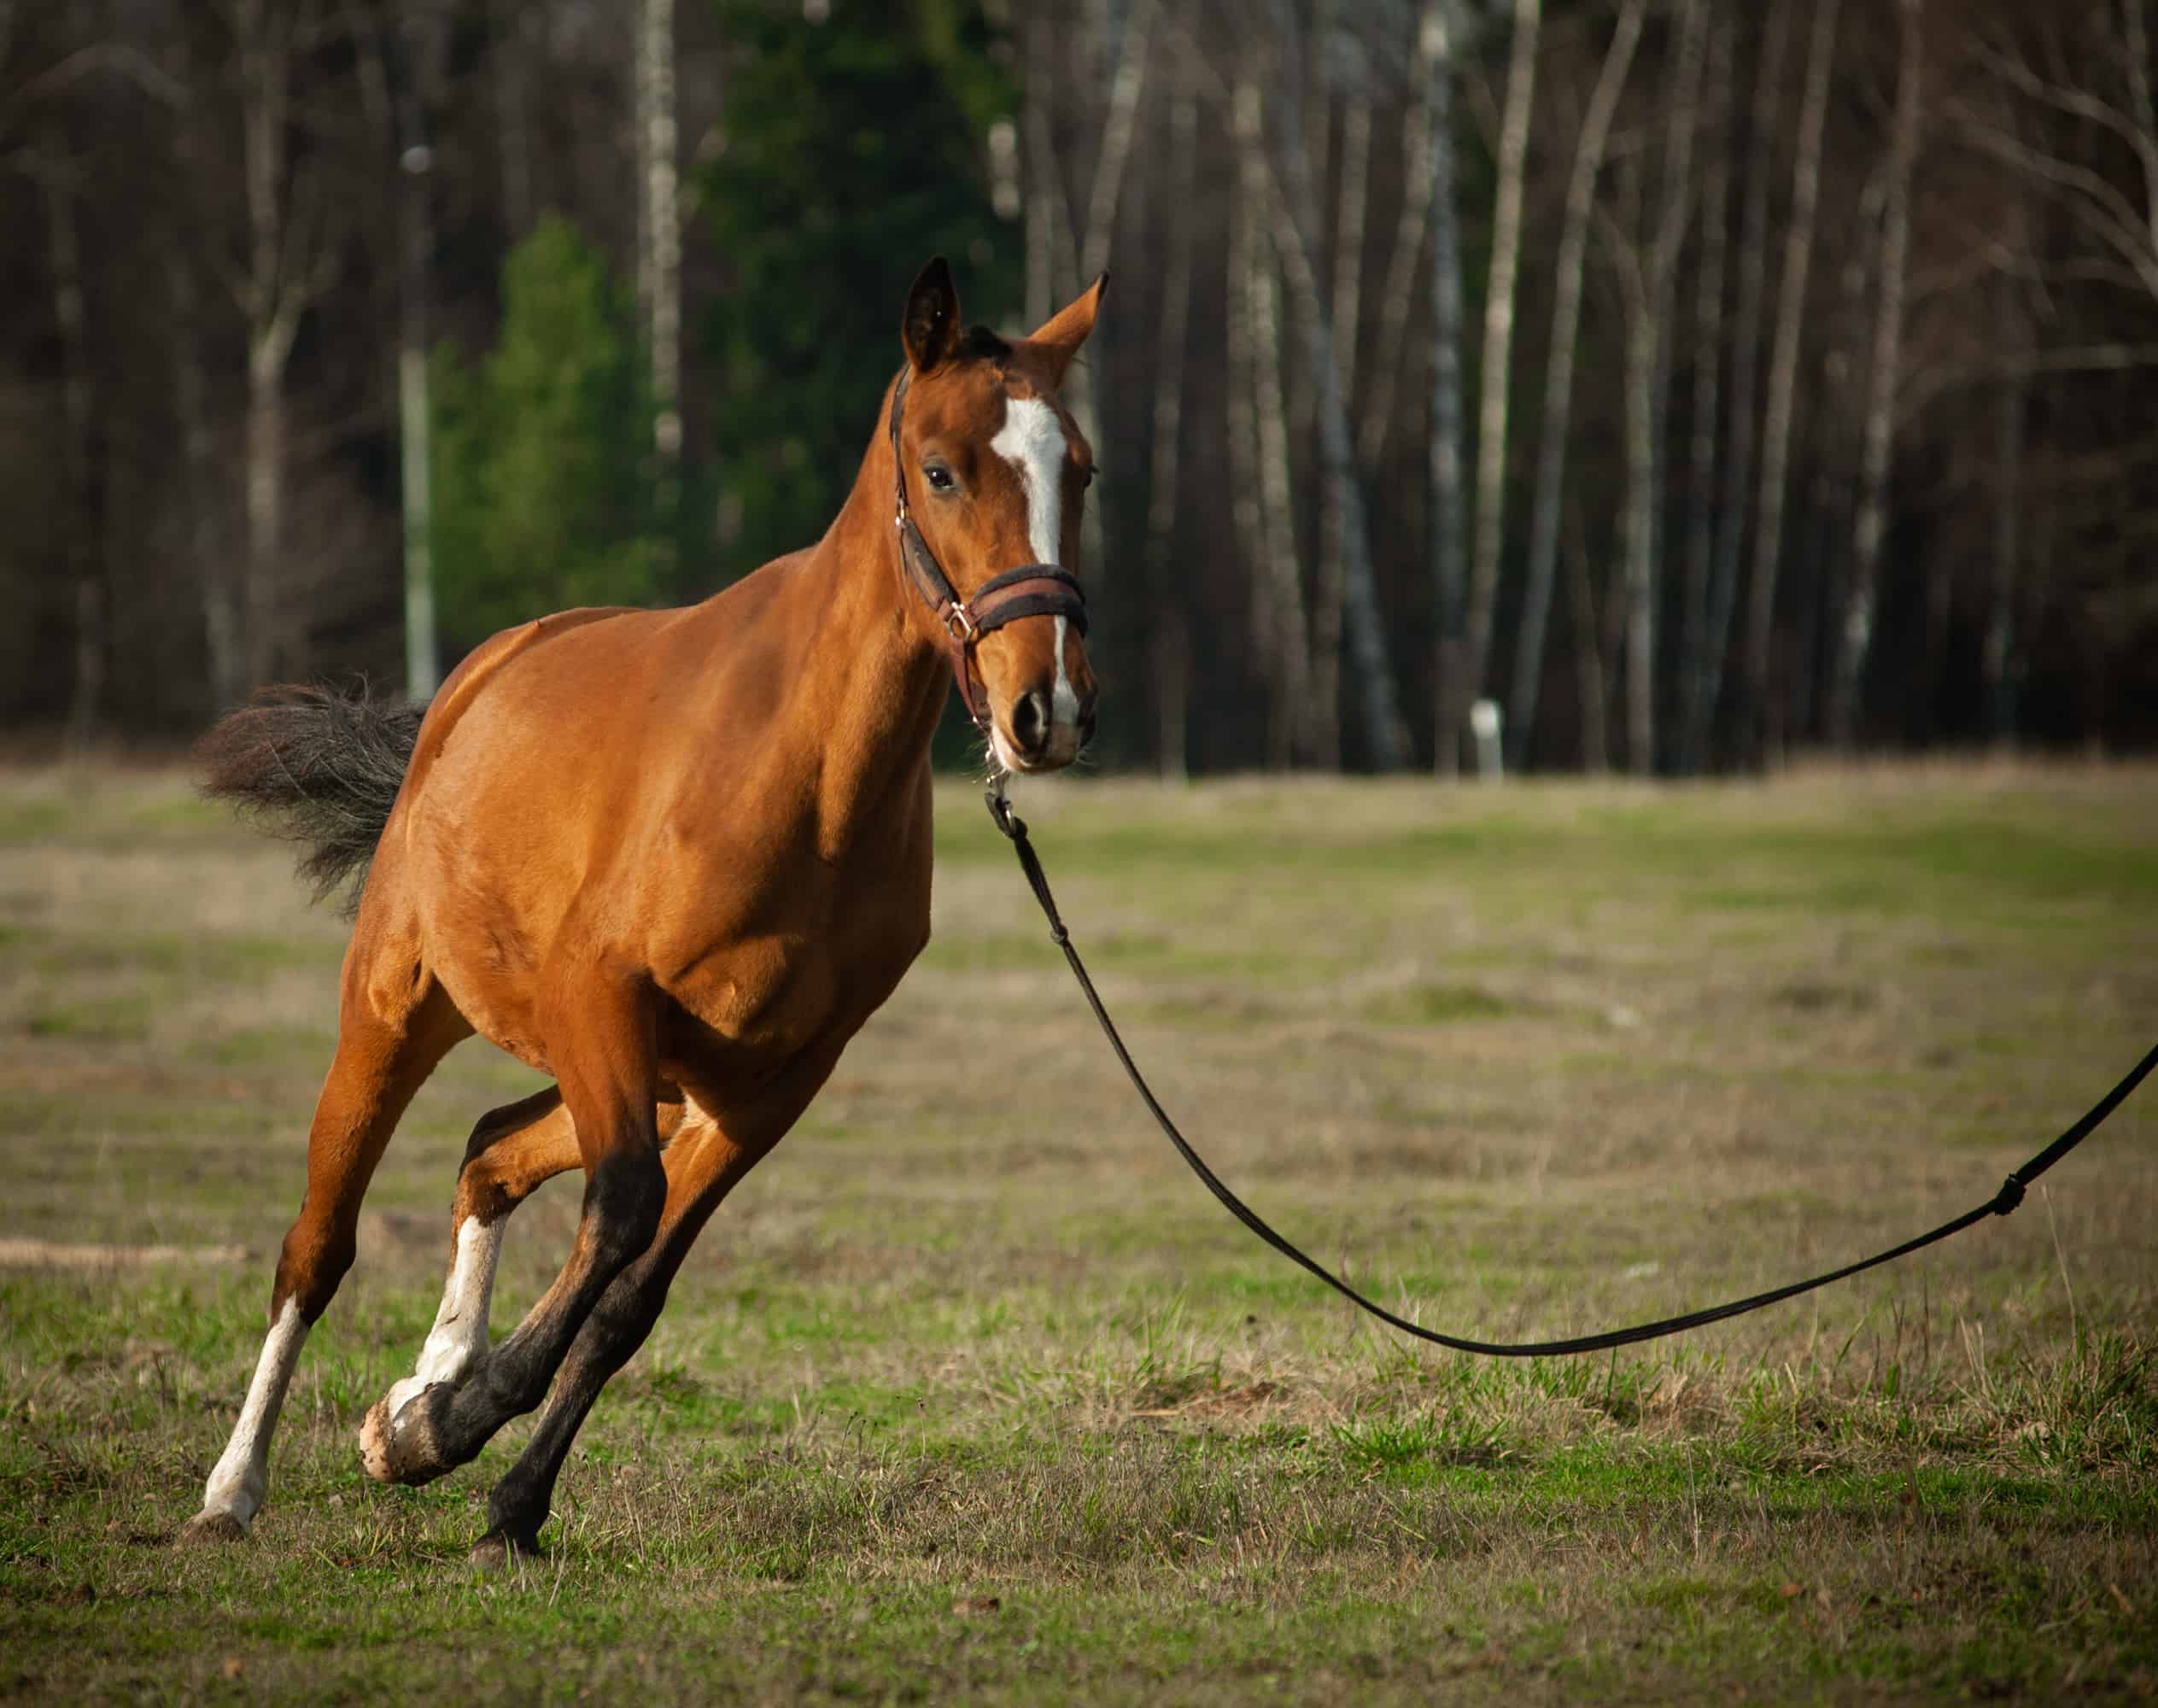 Young horse on a training in fields. Horse on the cord. Dressage horse running